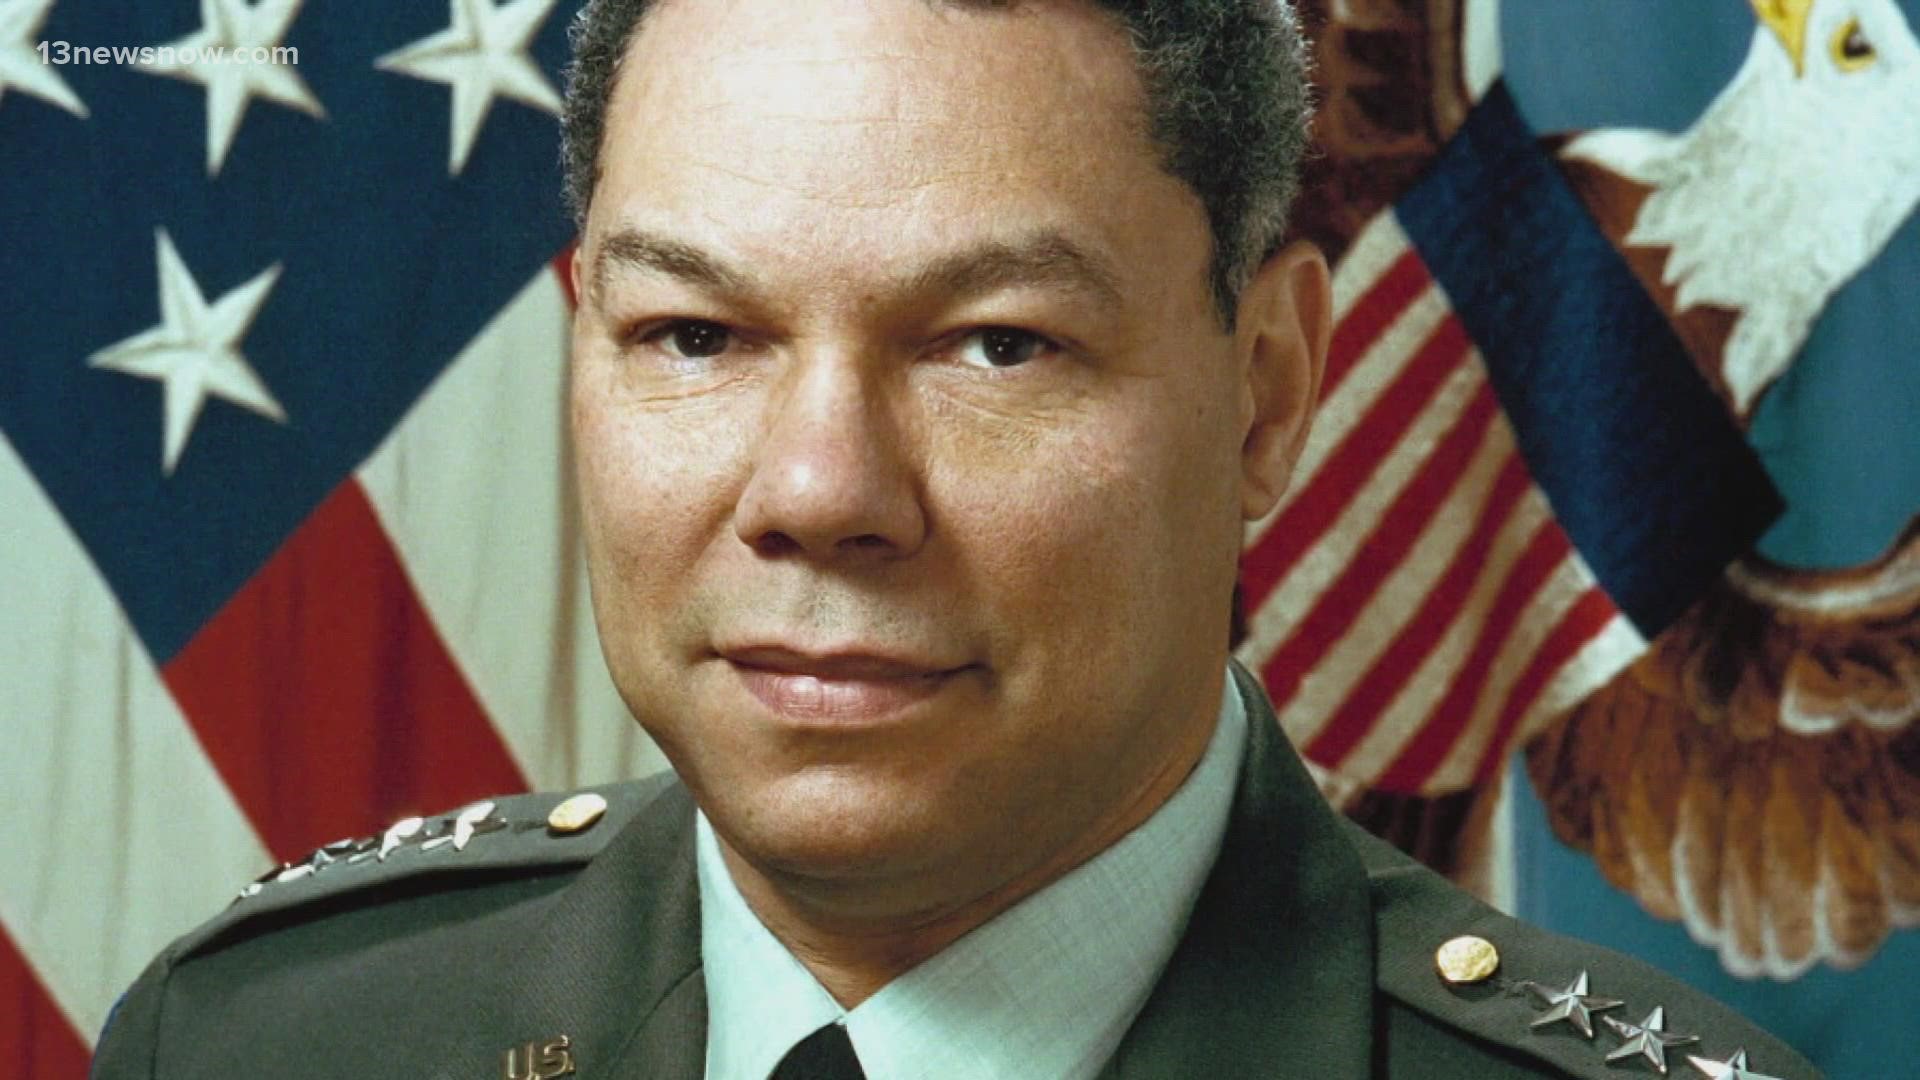 General Colin Powell served as an inspiring figure to many people in this country. Among them: African American cadets and instructors in the ROTC program at NSU.